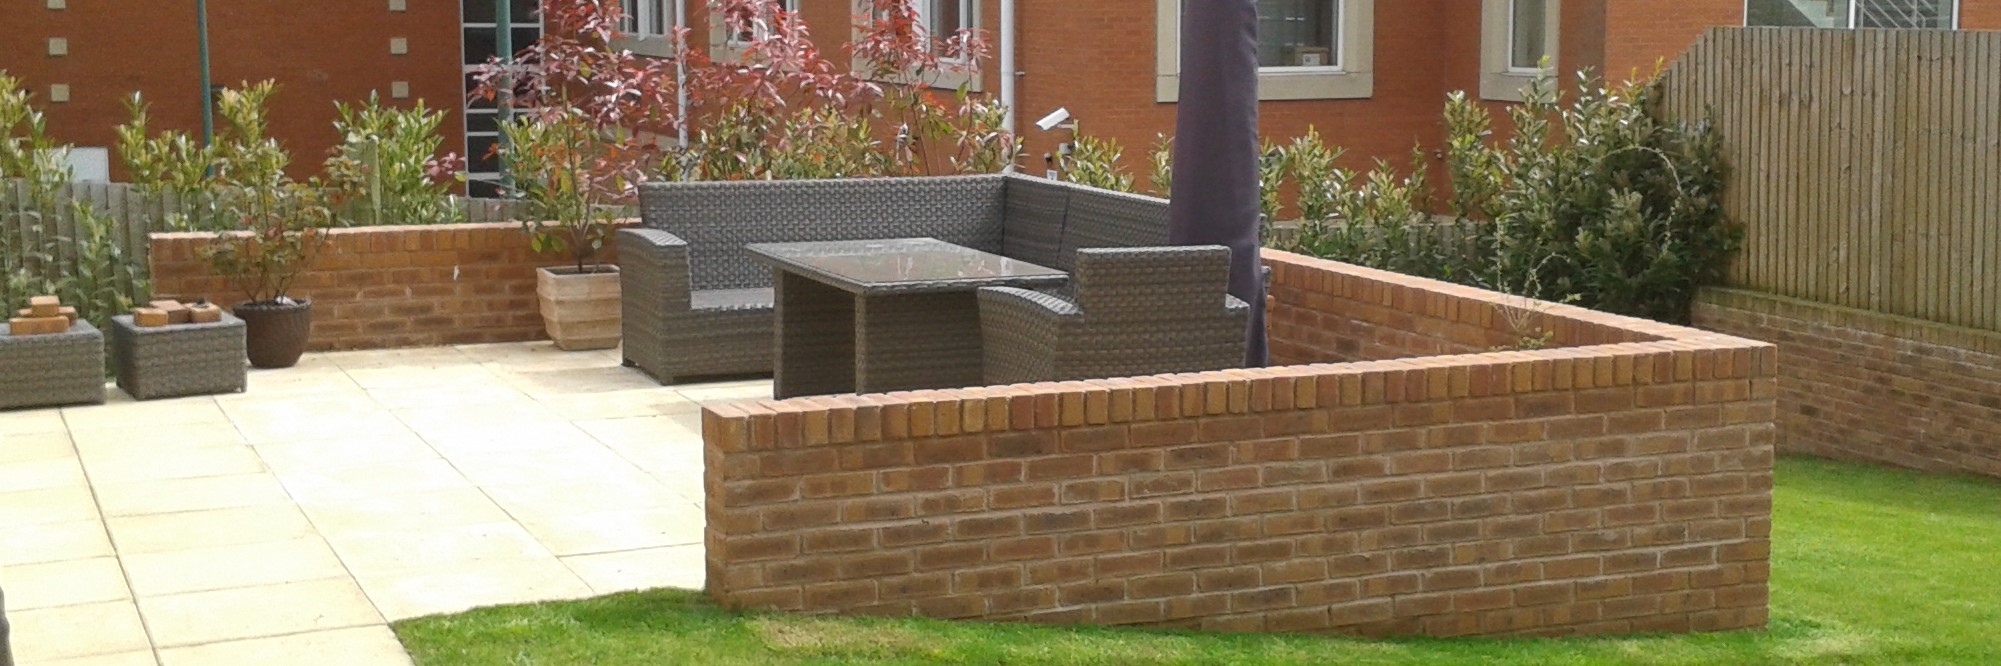 Patio areas DG Services Landscaping Gardening Bromsgrove Droitwich